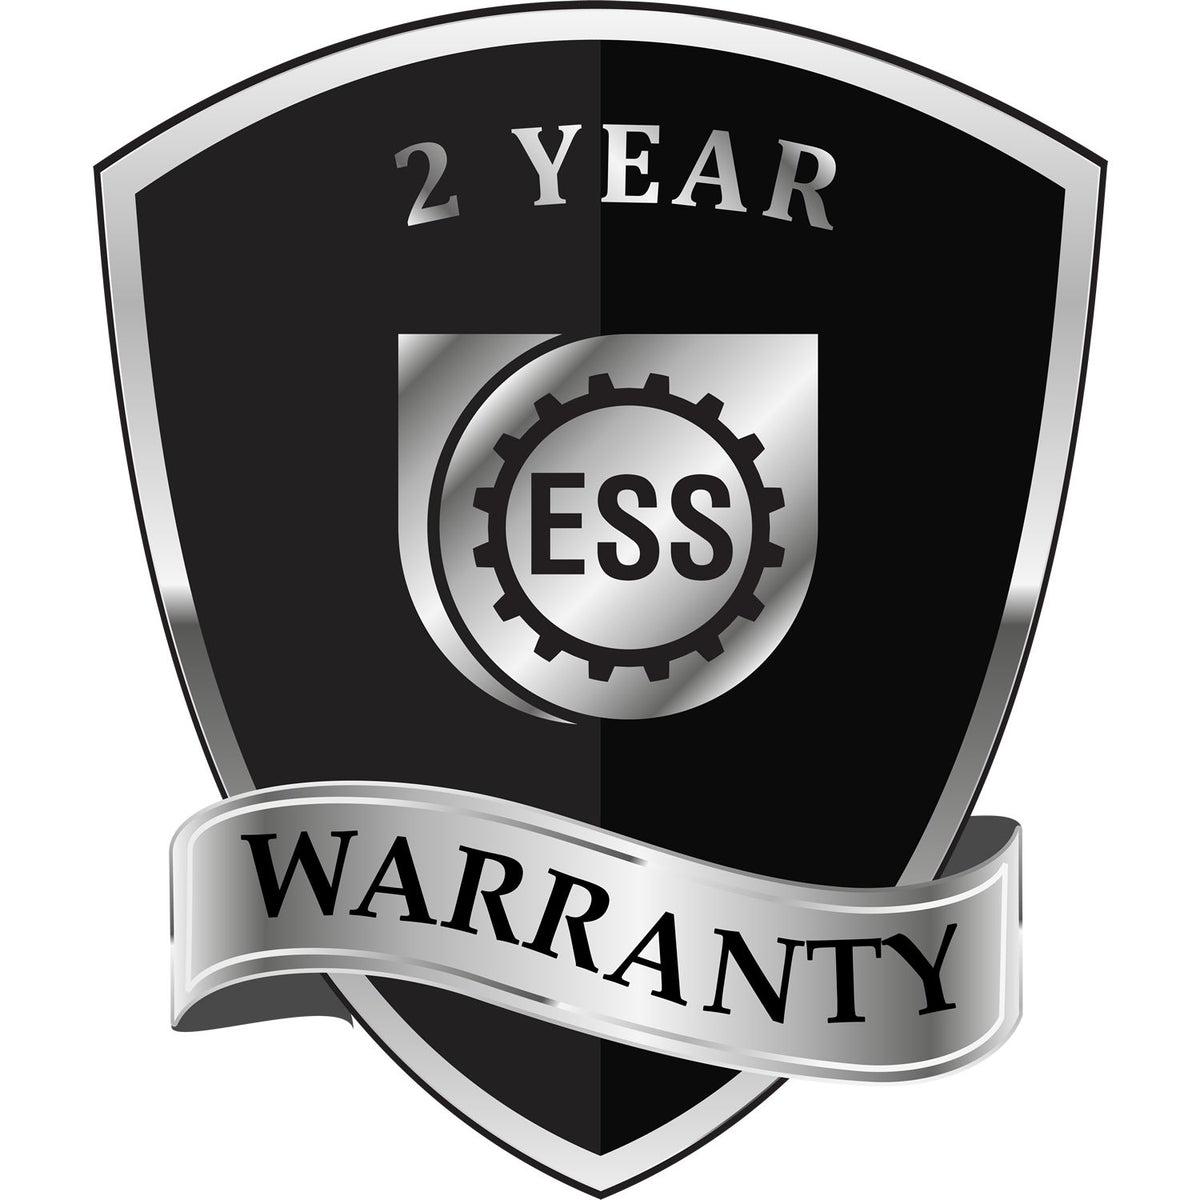 A badge or emblem showing a warranty icon for the Heavy Duty Cast Iron Missouri Land Surveyor Seal Embosser